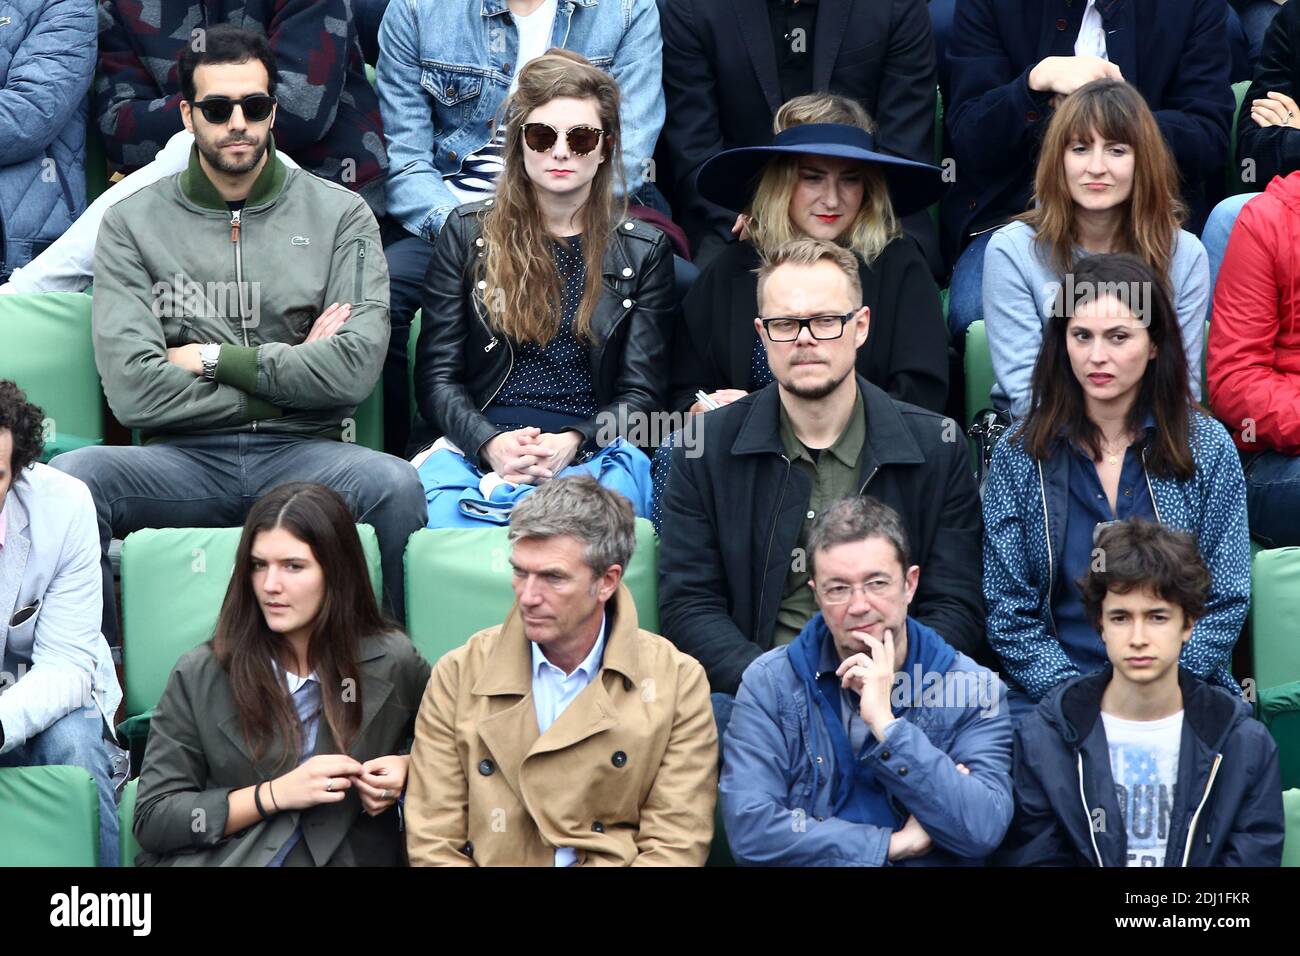 Philippe Caroit and Frederic Bouraly in the VIP Tribune during French Tennis Open at Roland-Garros arena in Paris, France on May 29, 2016. Photo by ABACAPRESS.COM Stock Photo